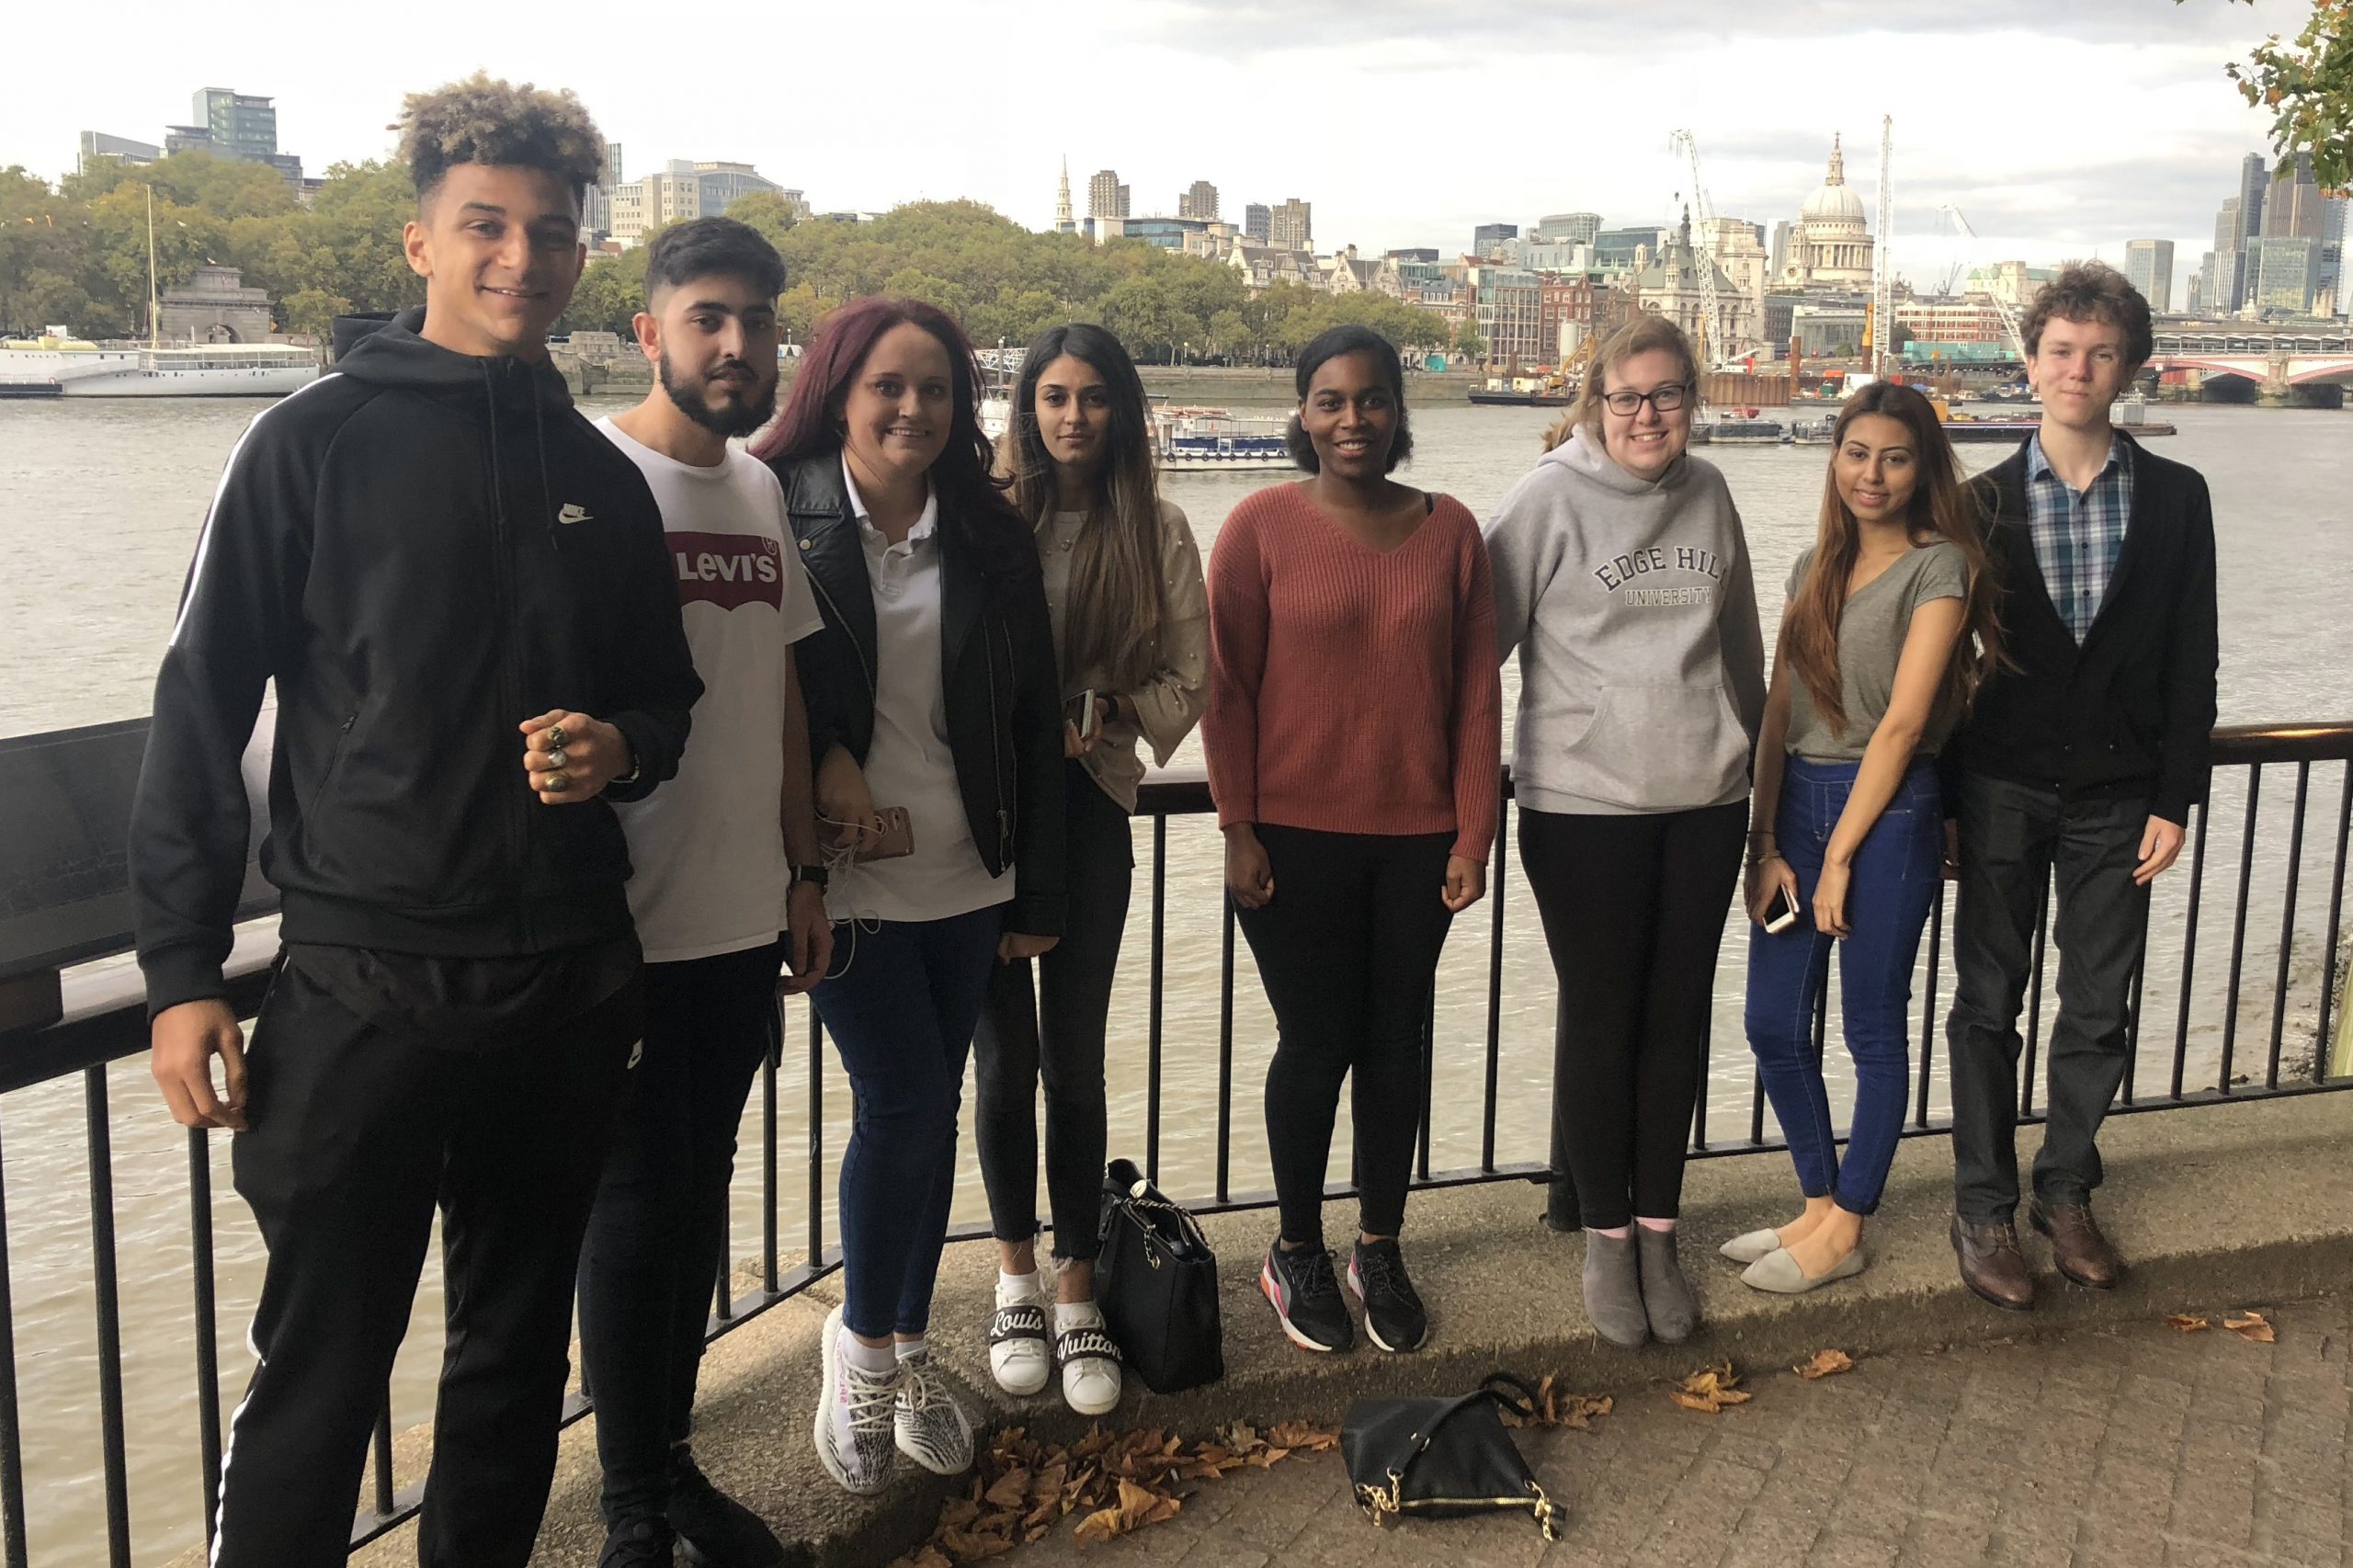 Eight students by the River Thames while on a visit to London to attend a graduate recruitment fair.